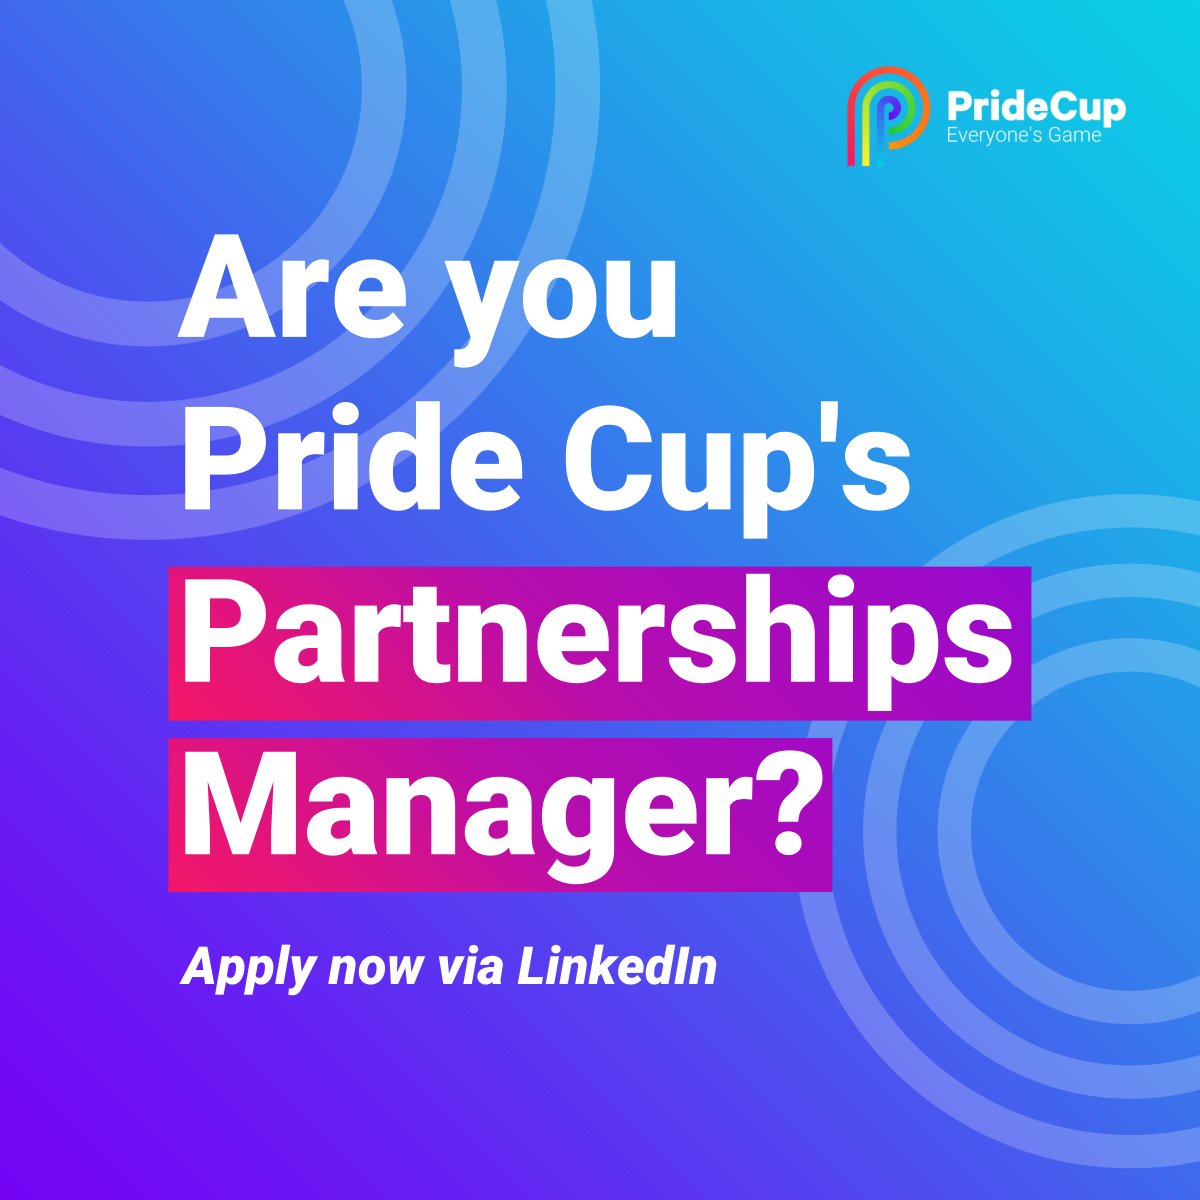 We are expanding our team! Pride Cup is looking for a part-time Partnerships Manager ideally based on the East coast. To learn about the role, head to linkedin.com/jobs/view/3522…